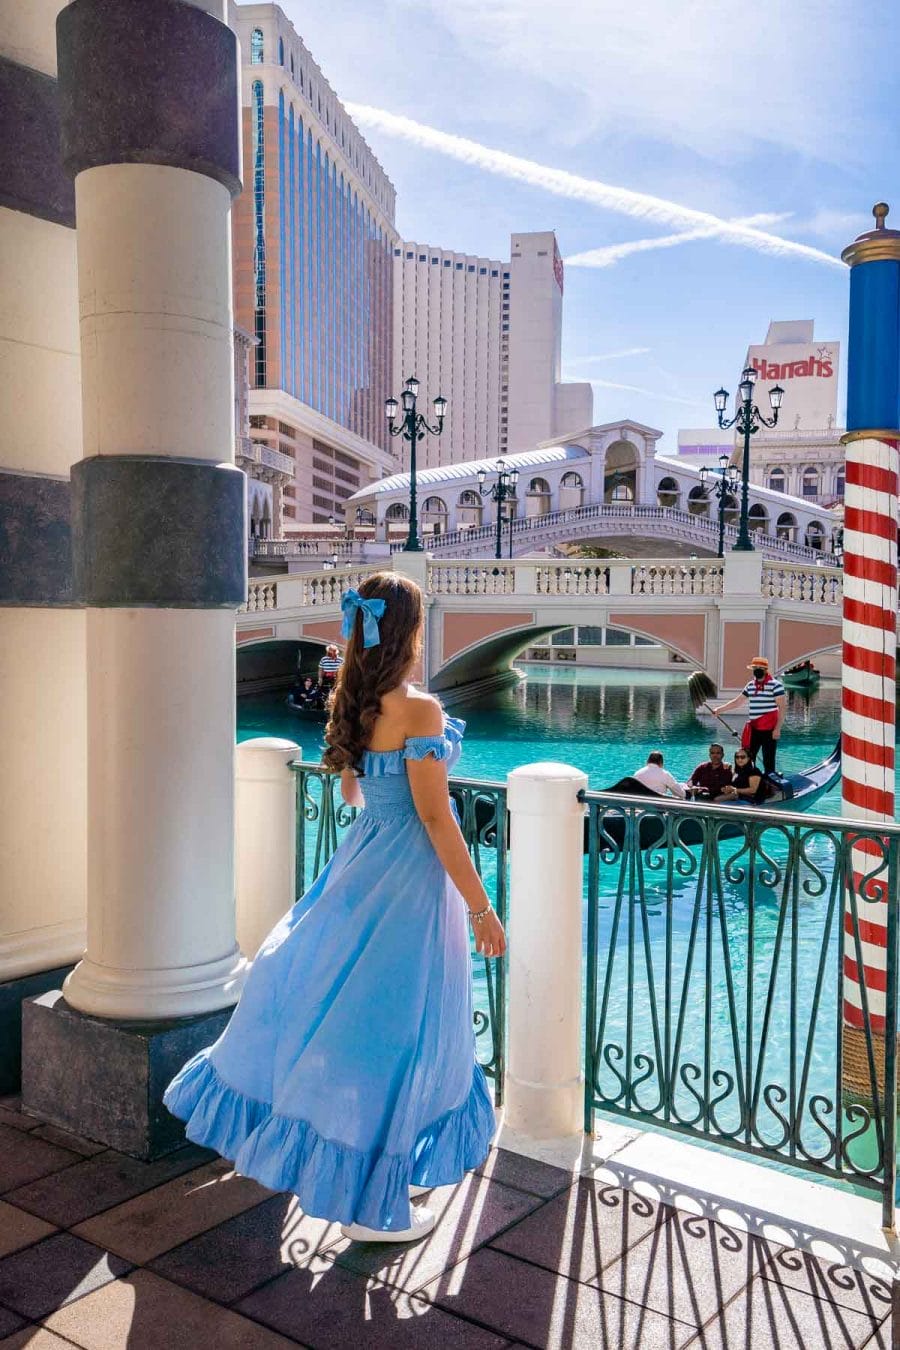 Girl in blue dress in front of the outdoor canals at The Venetian Las Vegas